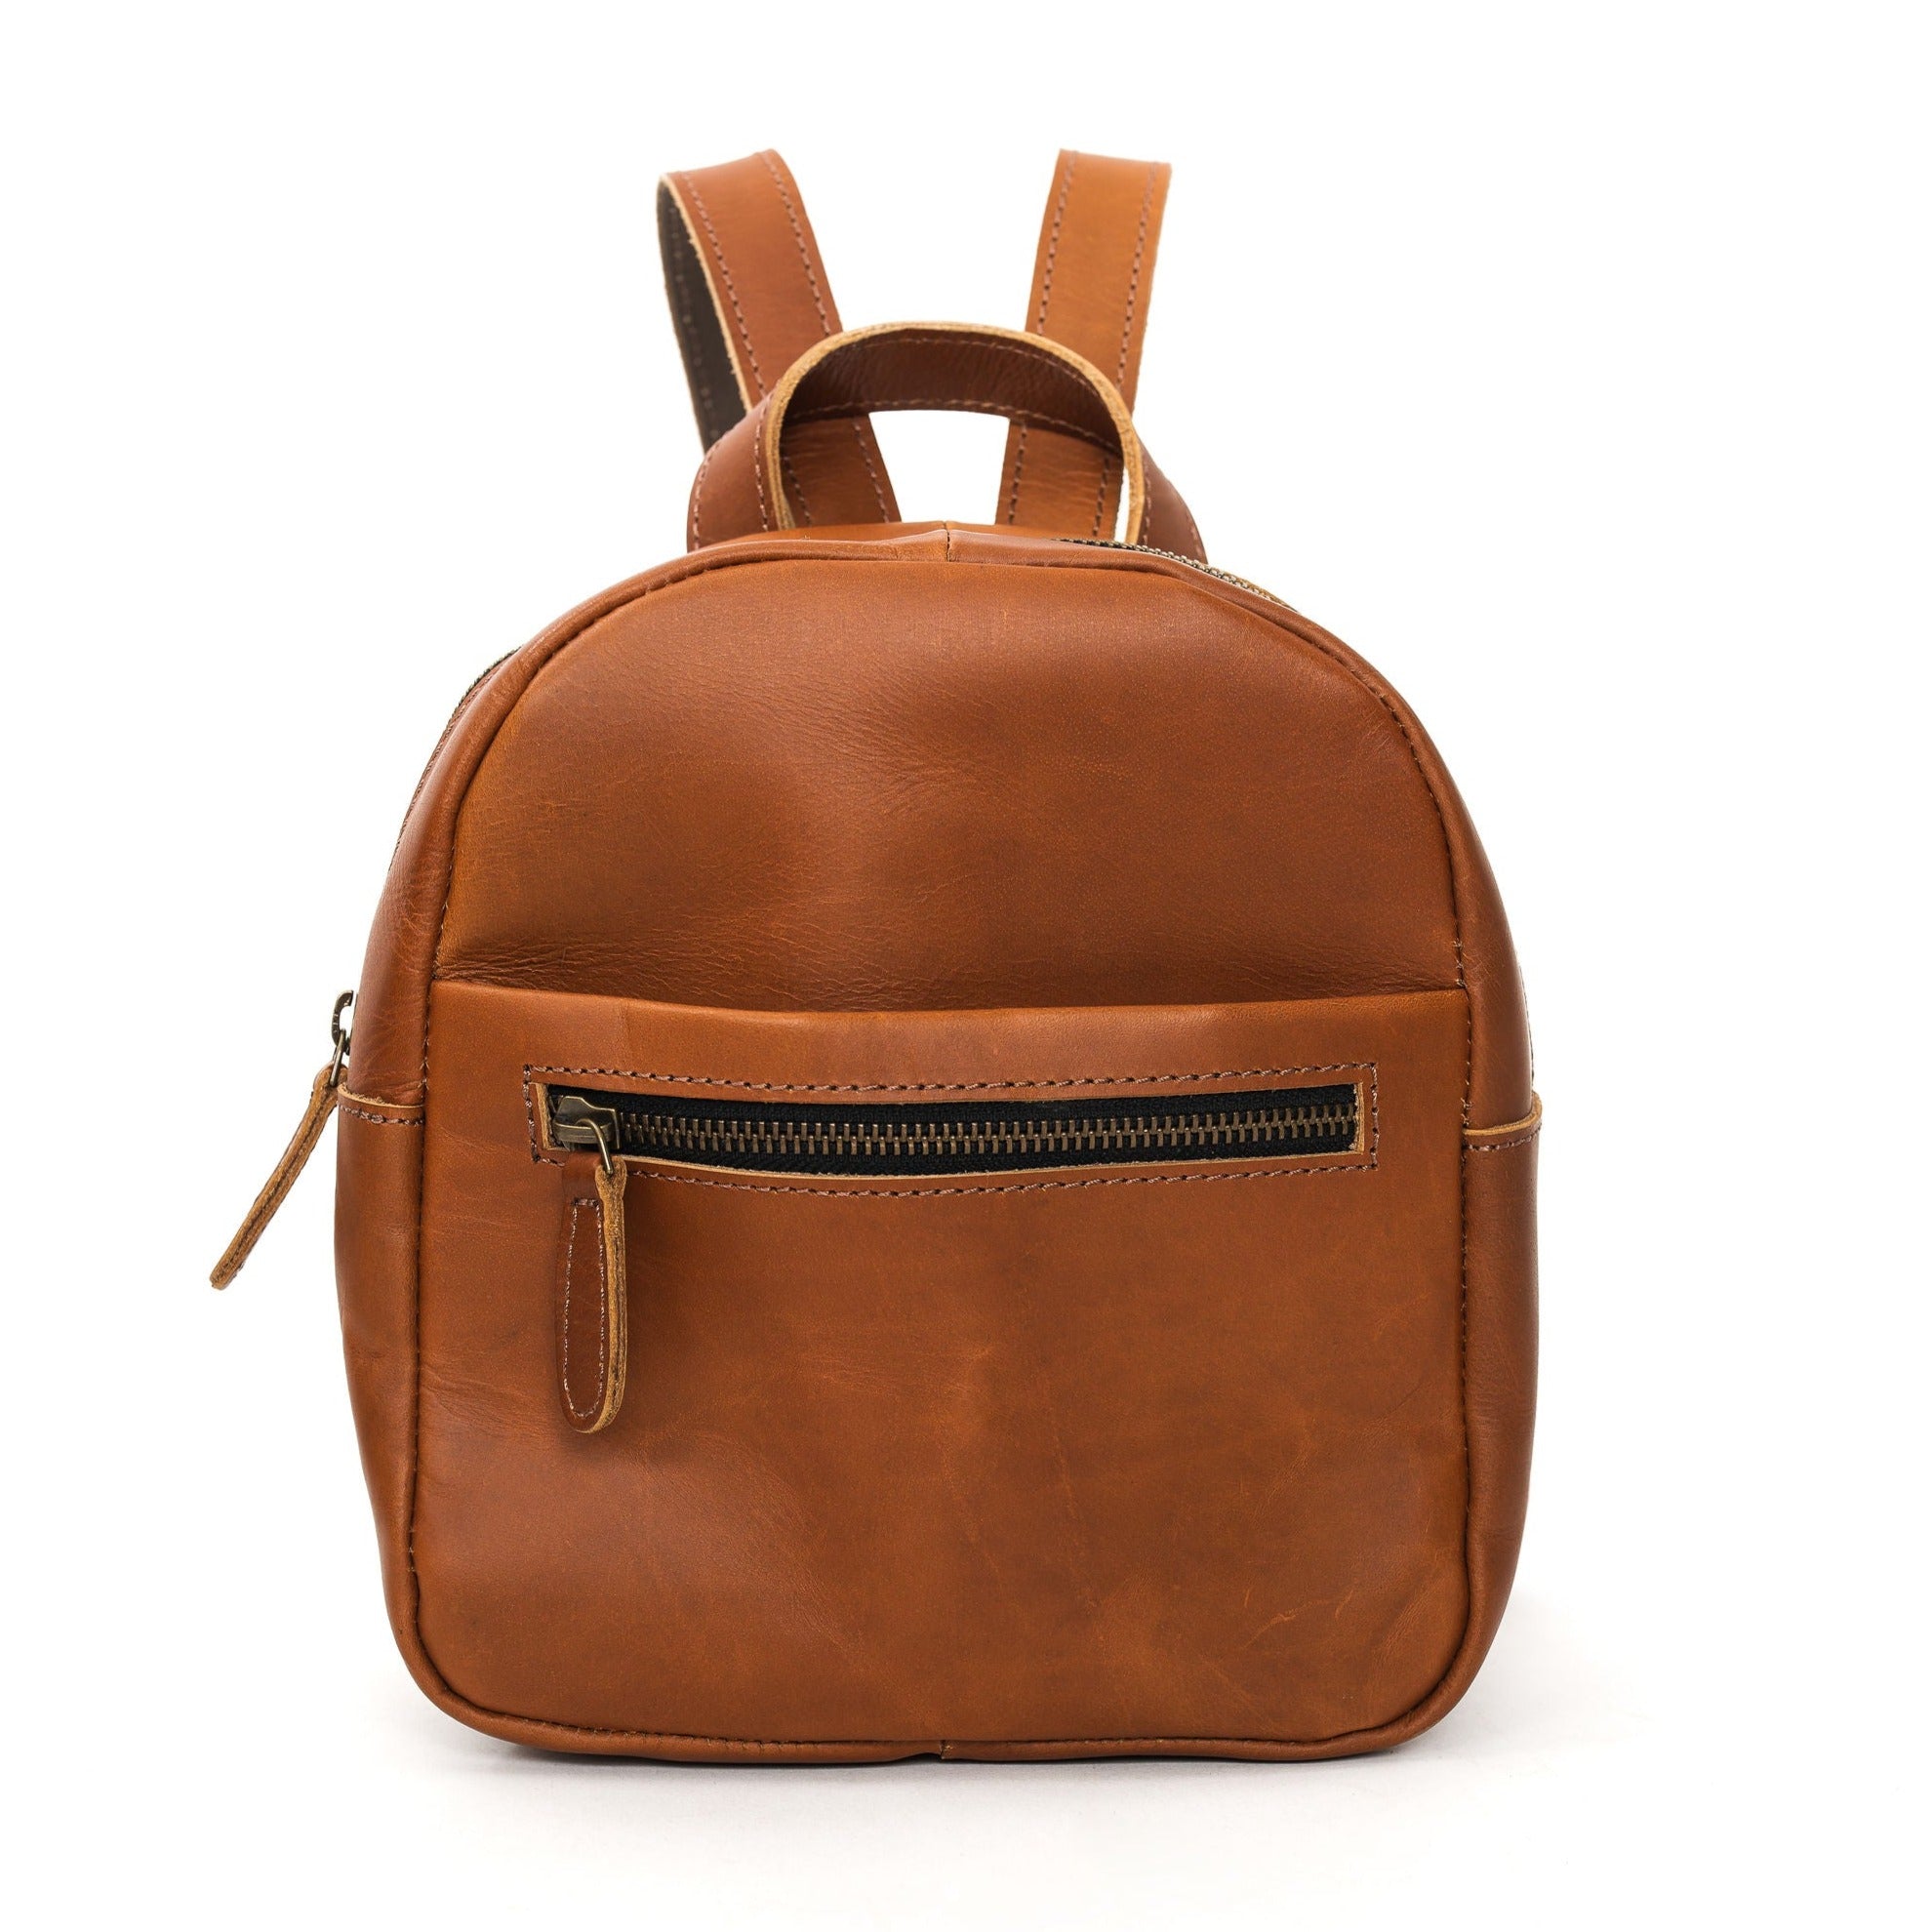 Bags: Genuine Leather Bag Styles - Fossil US